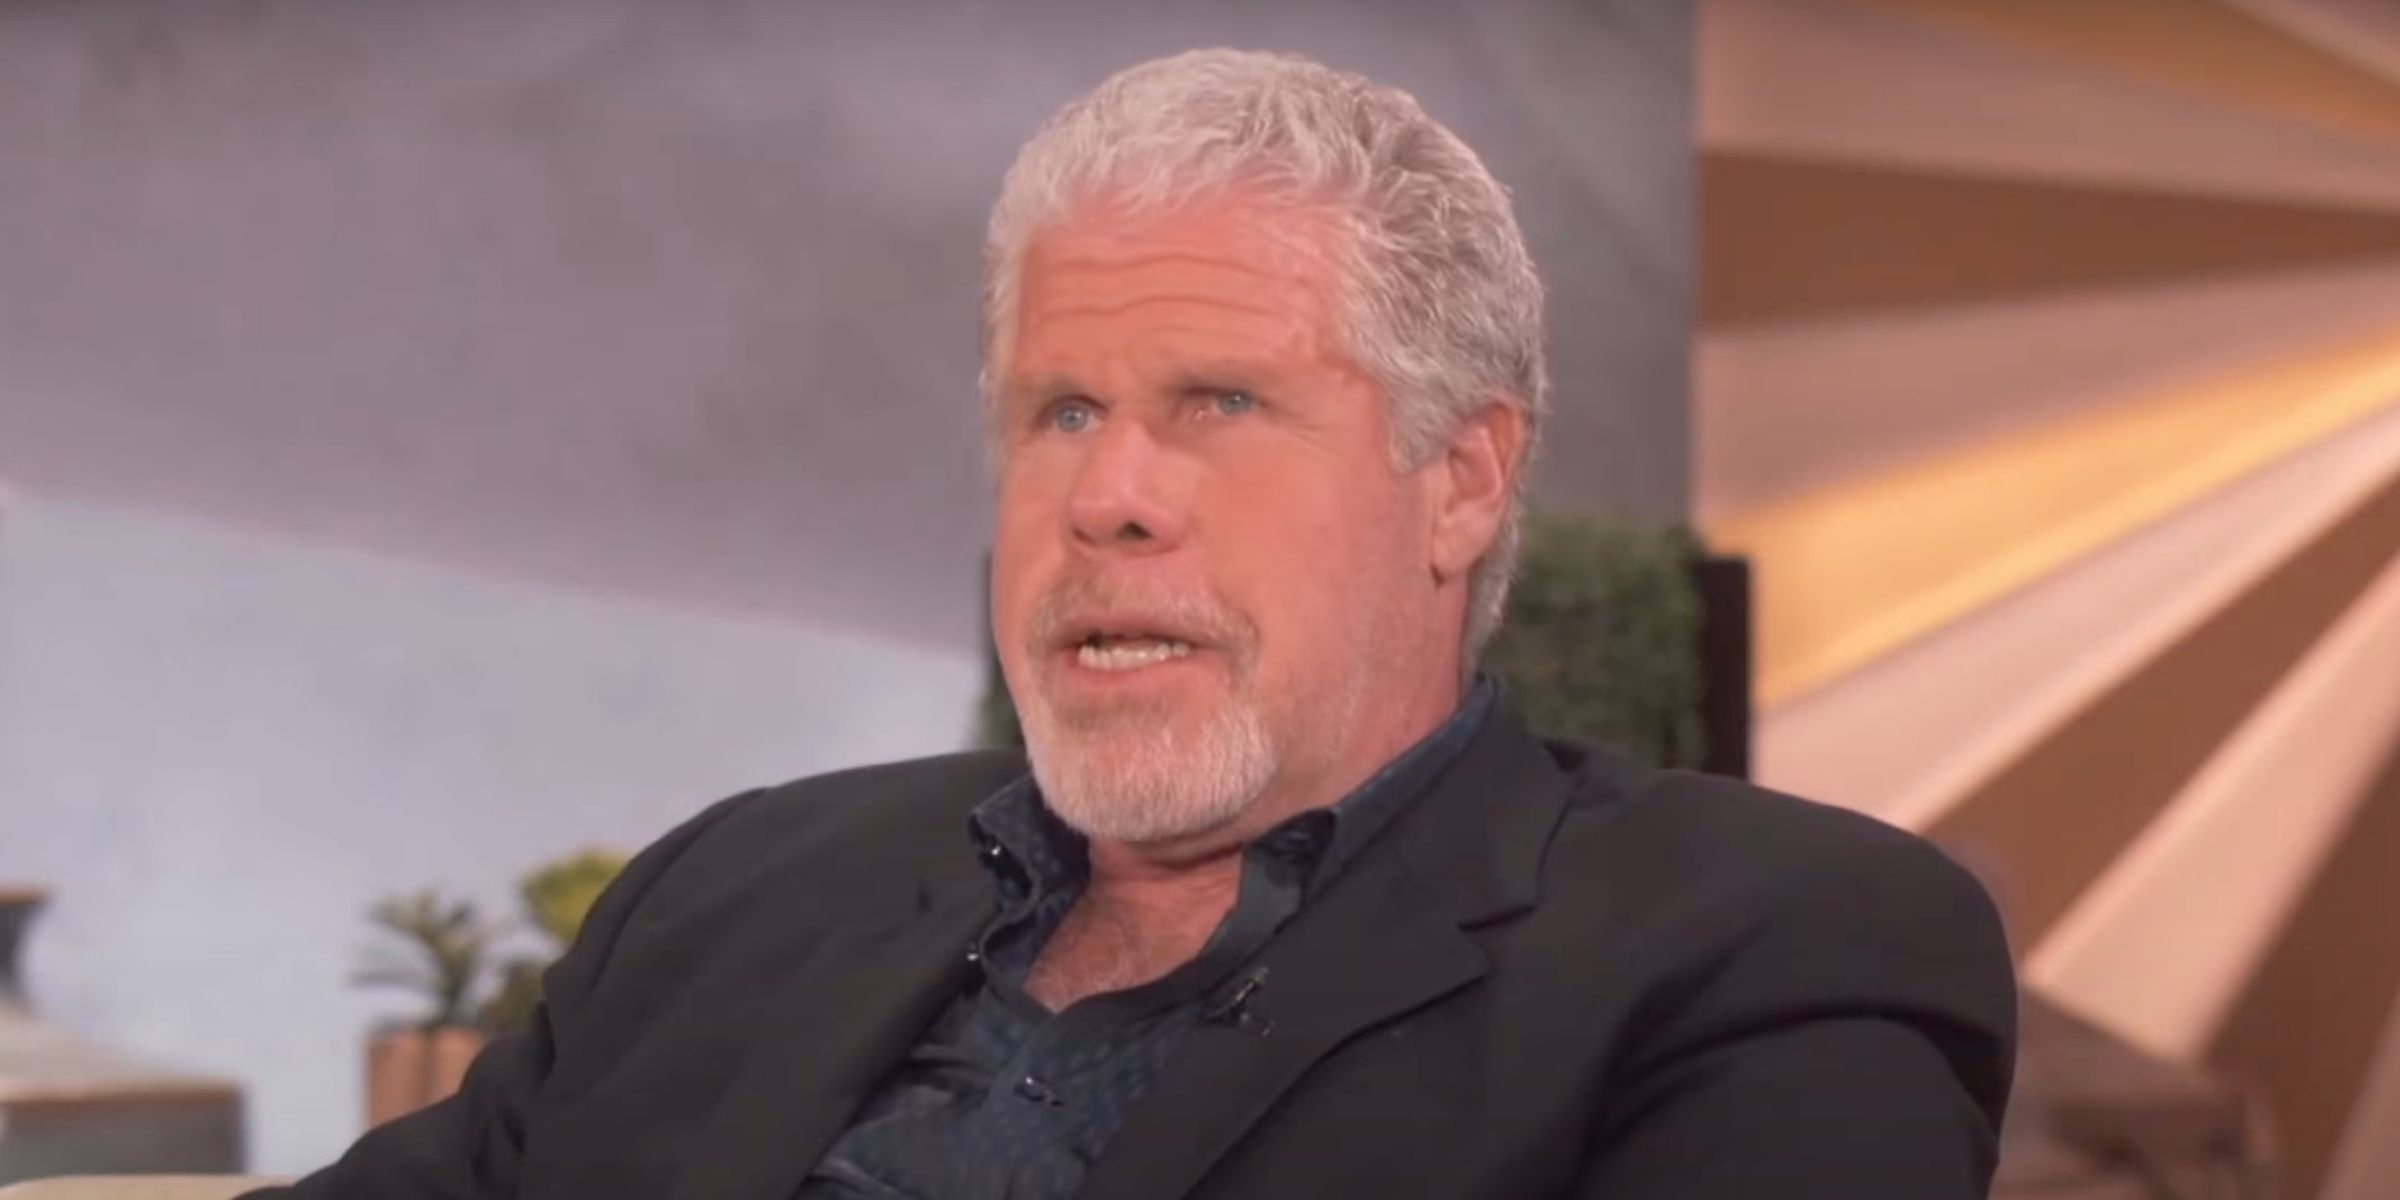 Ron Perlman appears on 'The Queen Latifa Show' discussing his experiences in stand-up comedy.